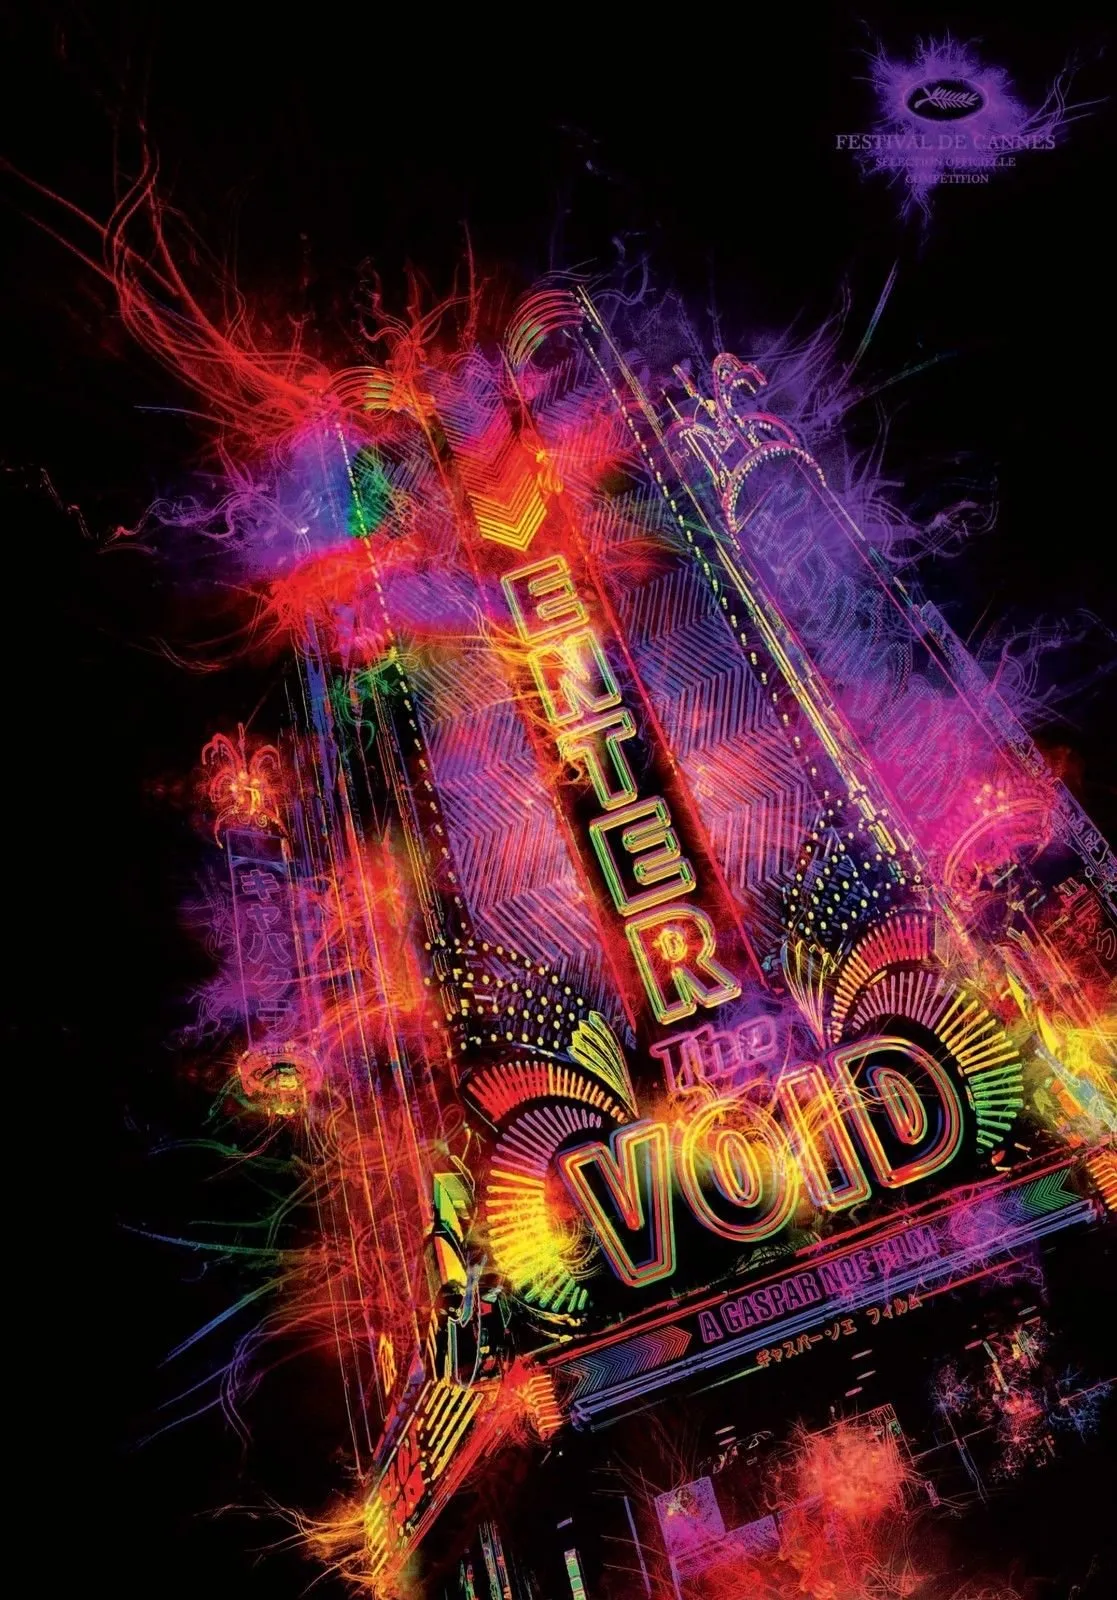 Poster of the void. Вход в пустоту 2009. Вход в пустоту Постер. Ноэ вход в пустоту.